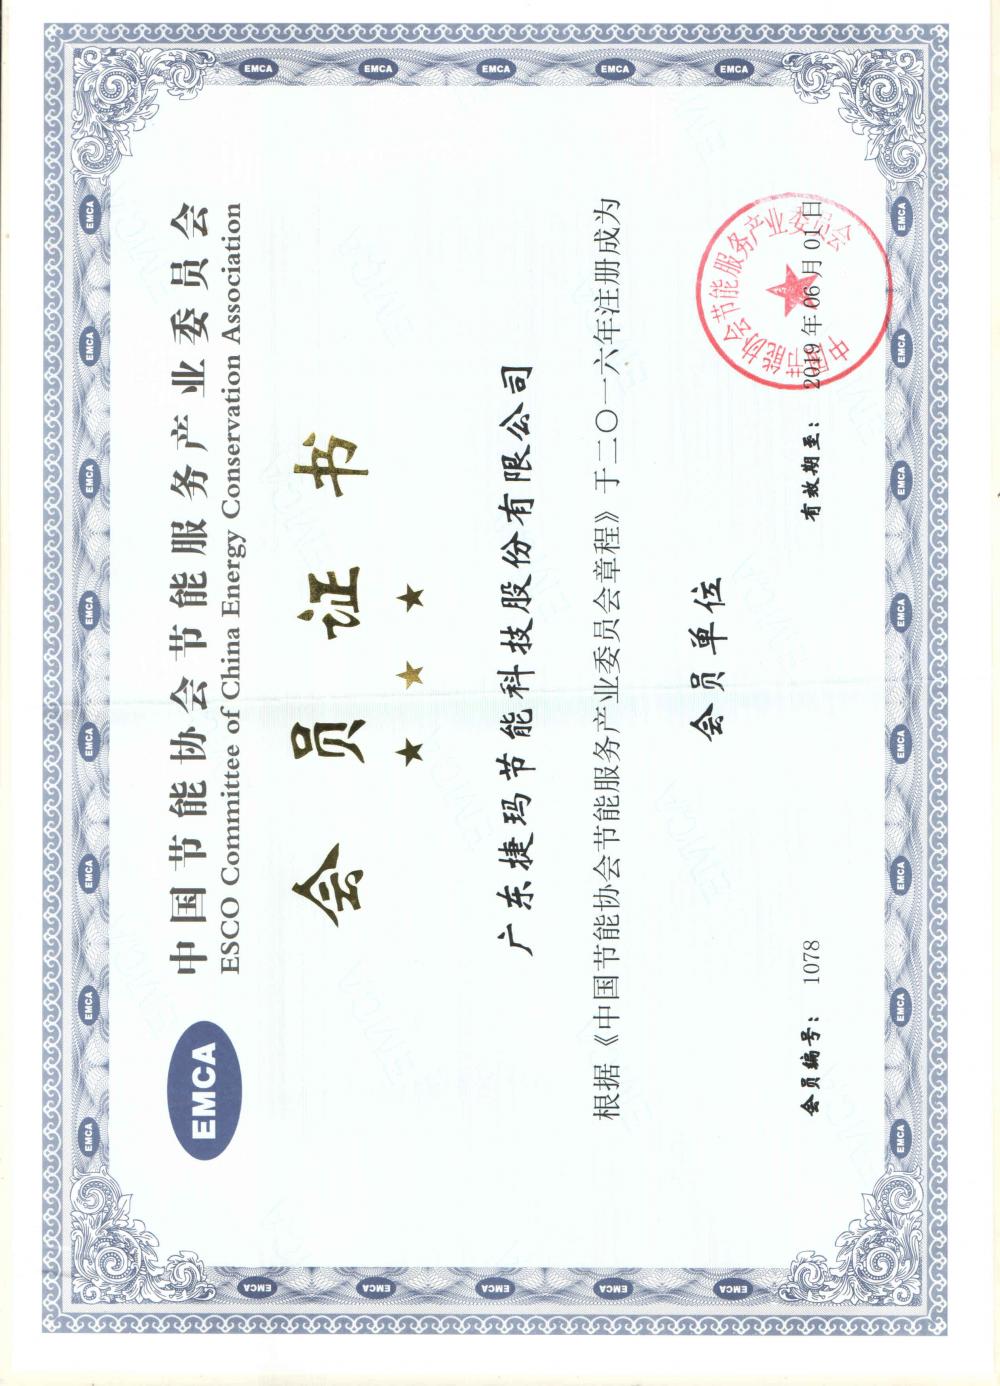 Member of ESCO Committee of China Energy Conservation Association